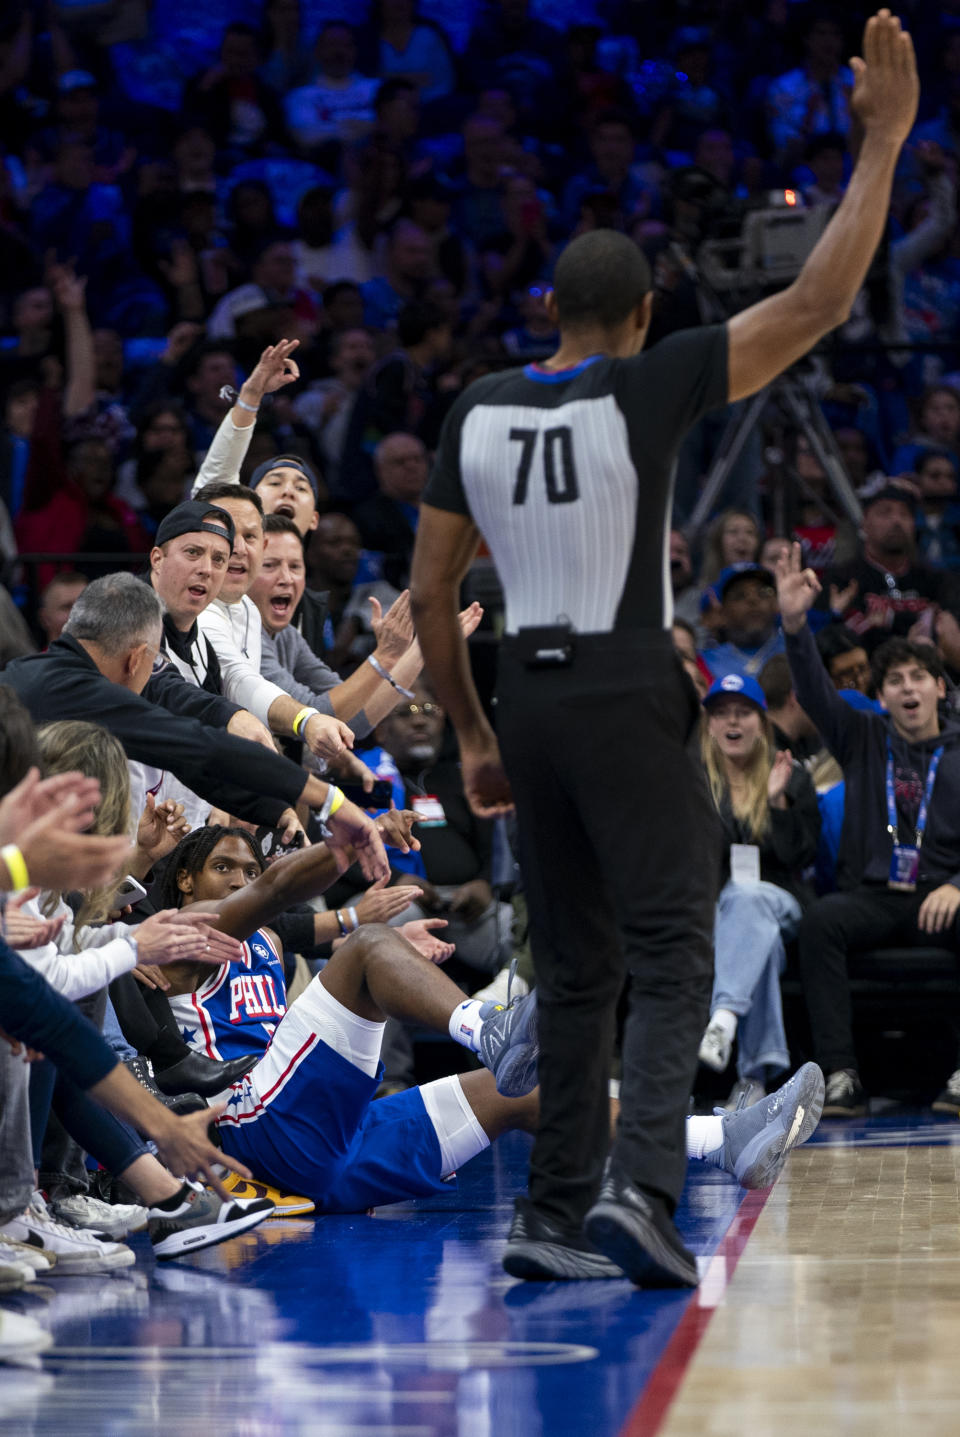 Philadelphia 76ers' Tyrese Maxey, left, falls into the fans after hitting the three point shot during the first half of an NBA basketball game against the Portland Trail Blazers, Sunday, Oct. 29, 2023, in Philadelphia. (AP Photo/Chris Szagola)